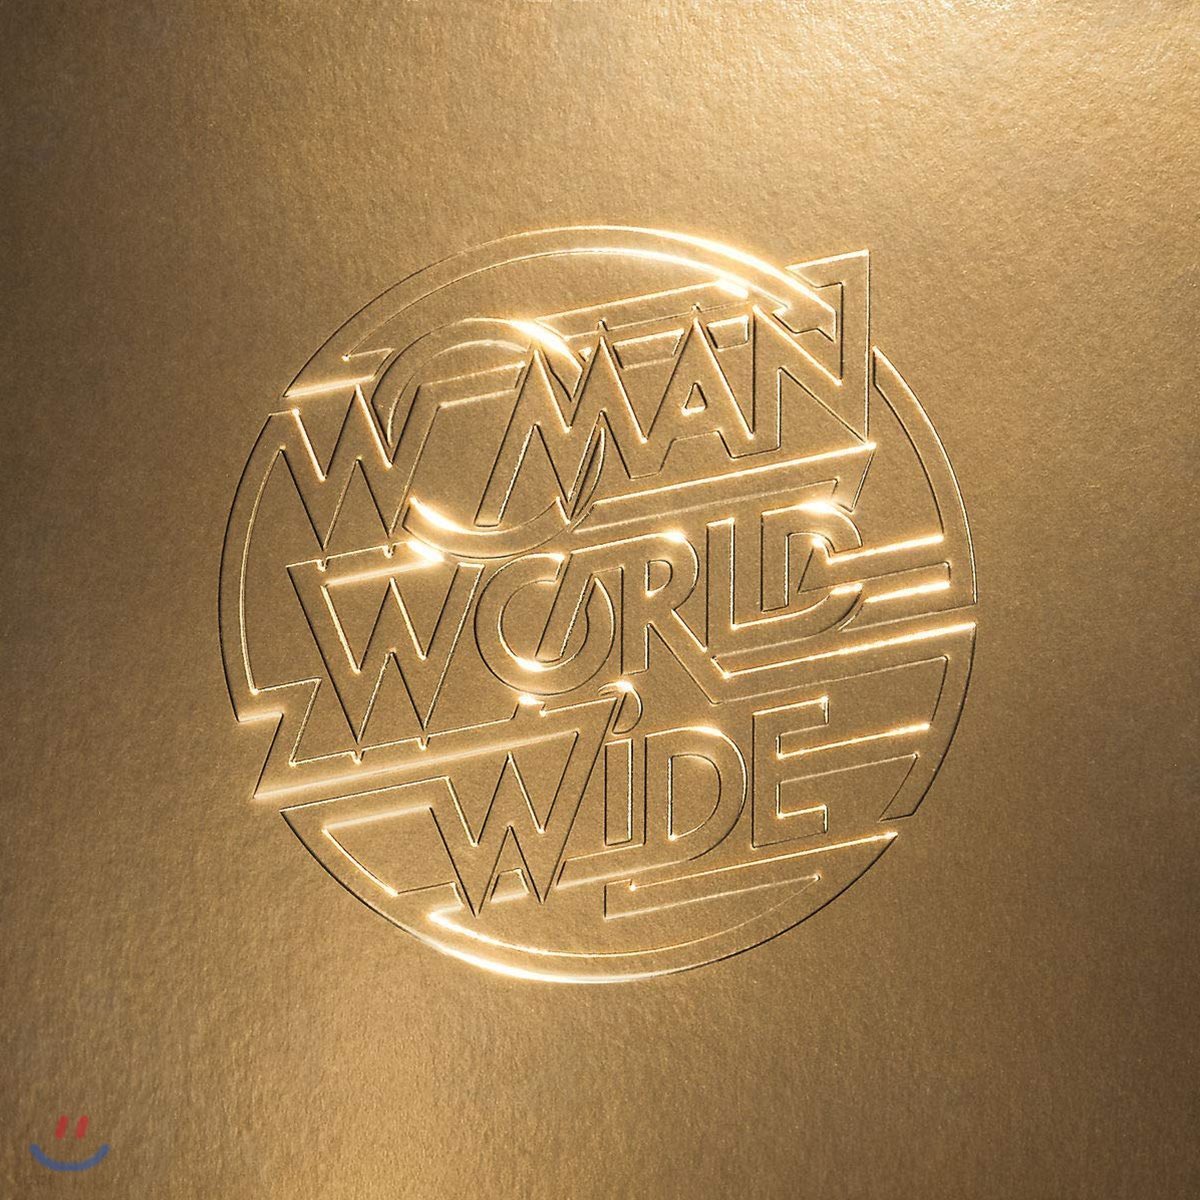 Justice - Woman Worldwide - 10th Justice Mixed & Remixed 저스티스 라이브 스튜디오 앨범